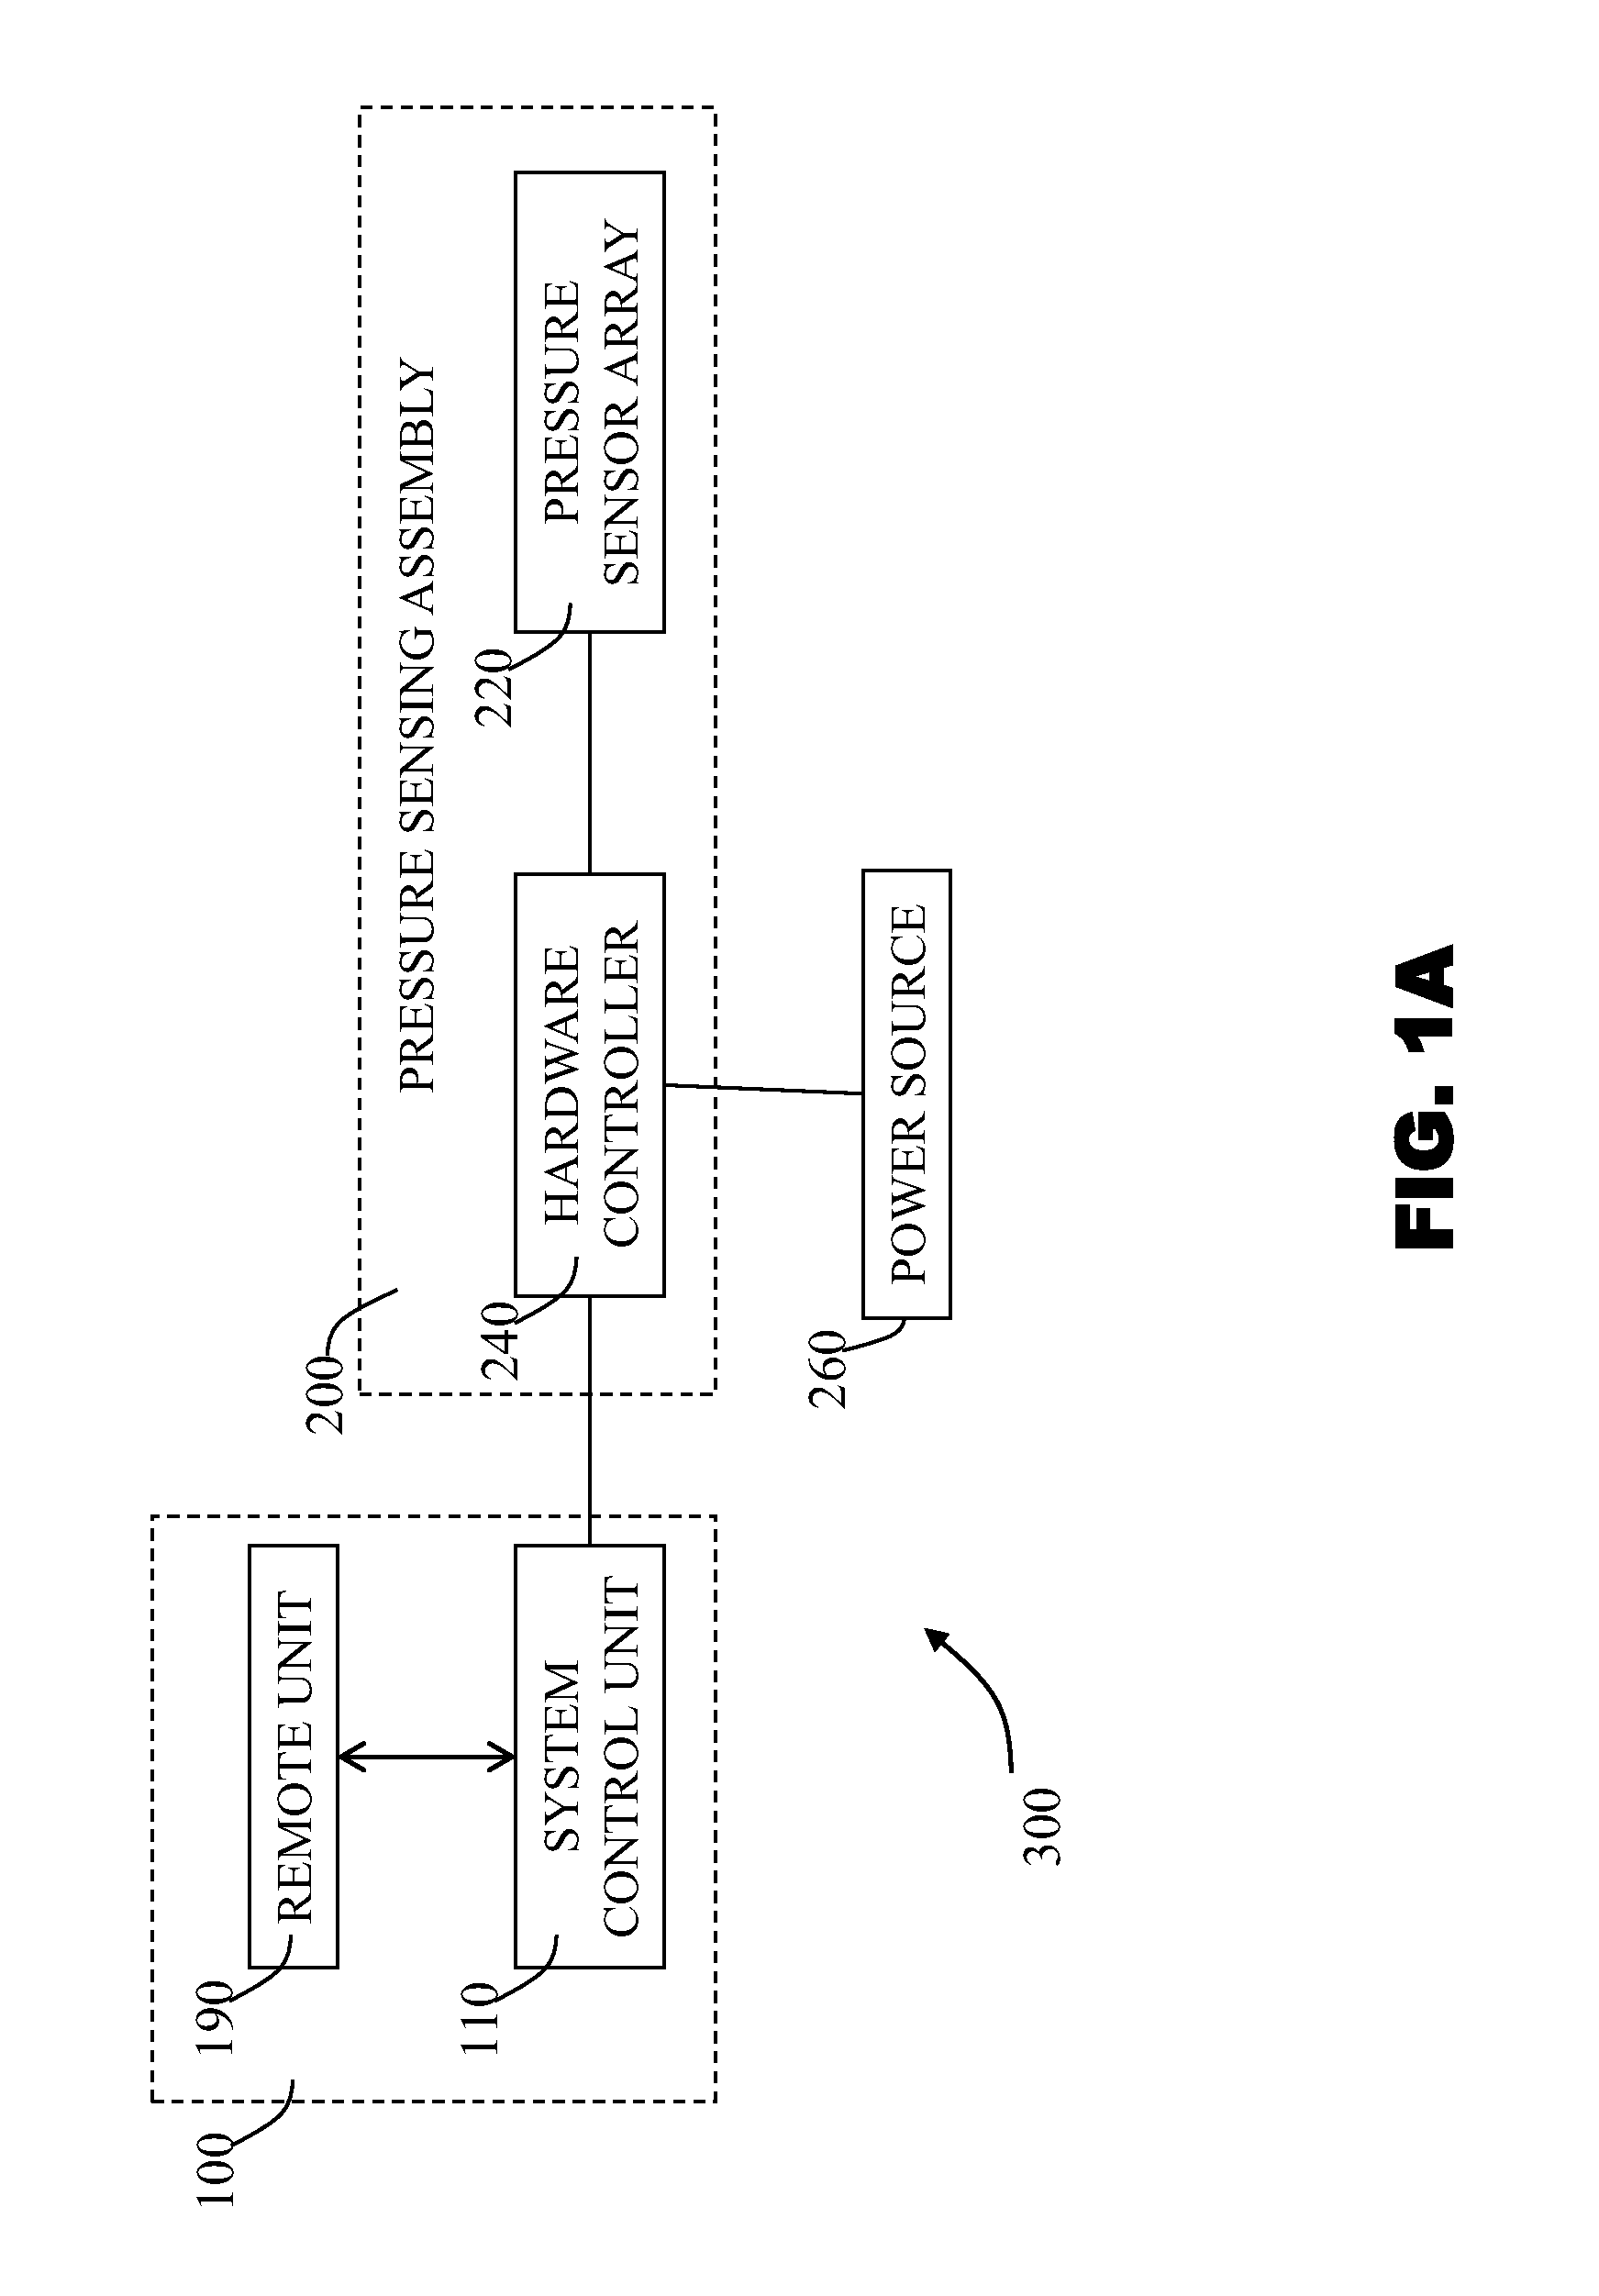 Pressure sensor assembly and associated method for preventing the development of pressure injuries